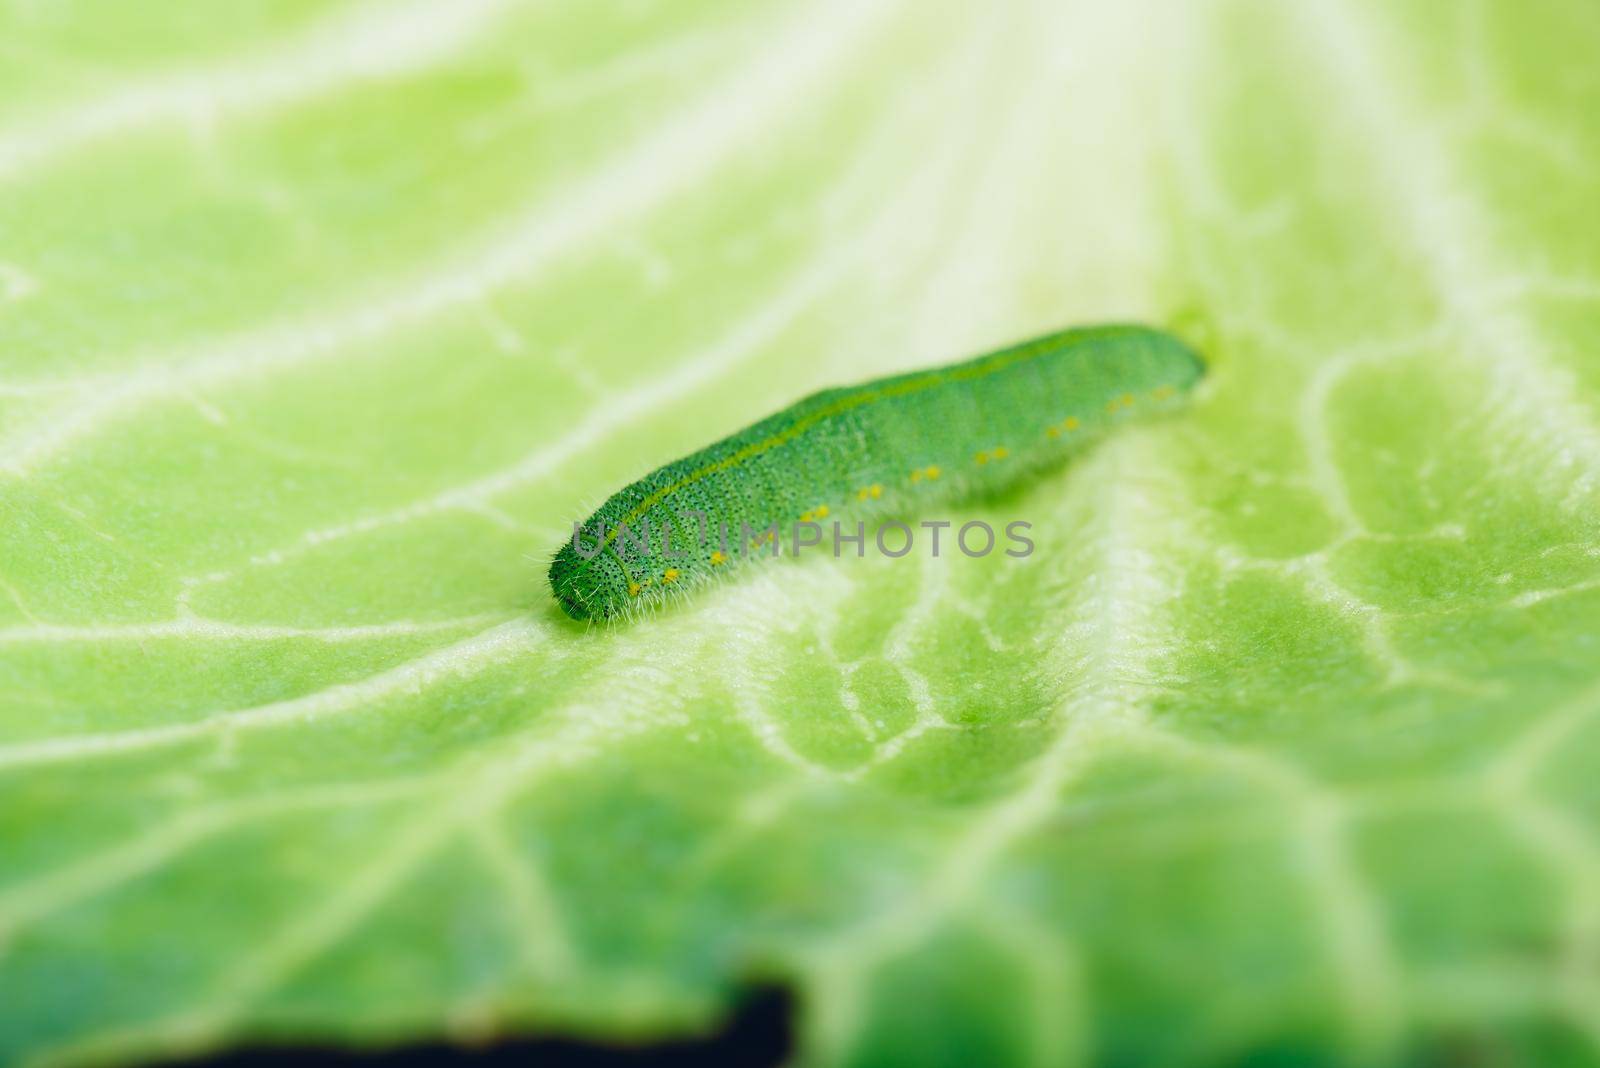 Green Caterpillar Crawling on a Cabbage Leaf